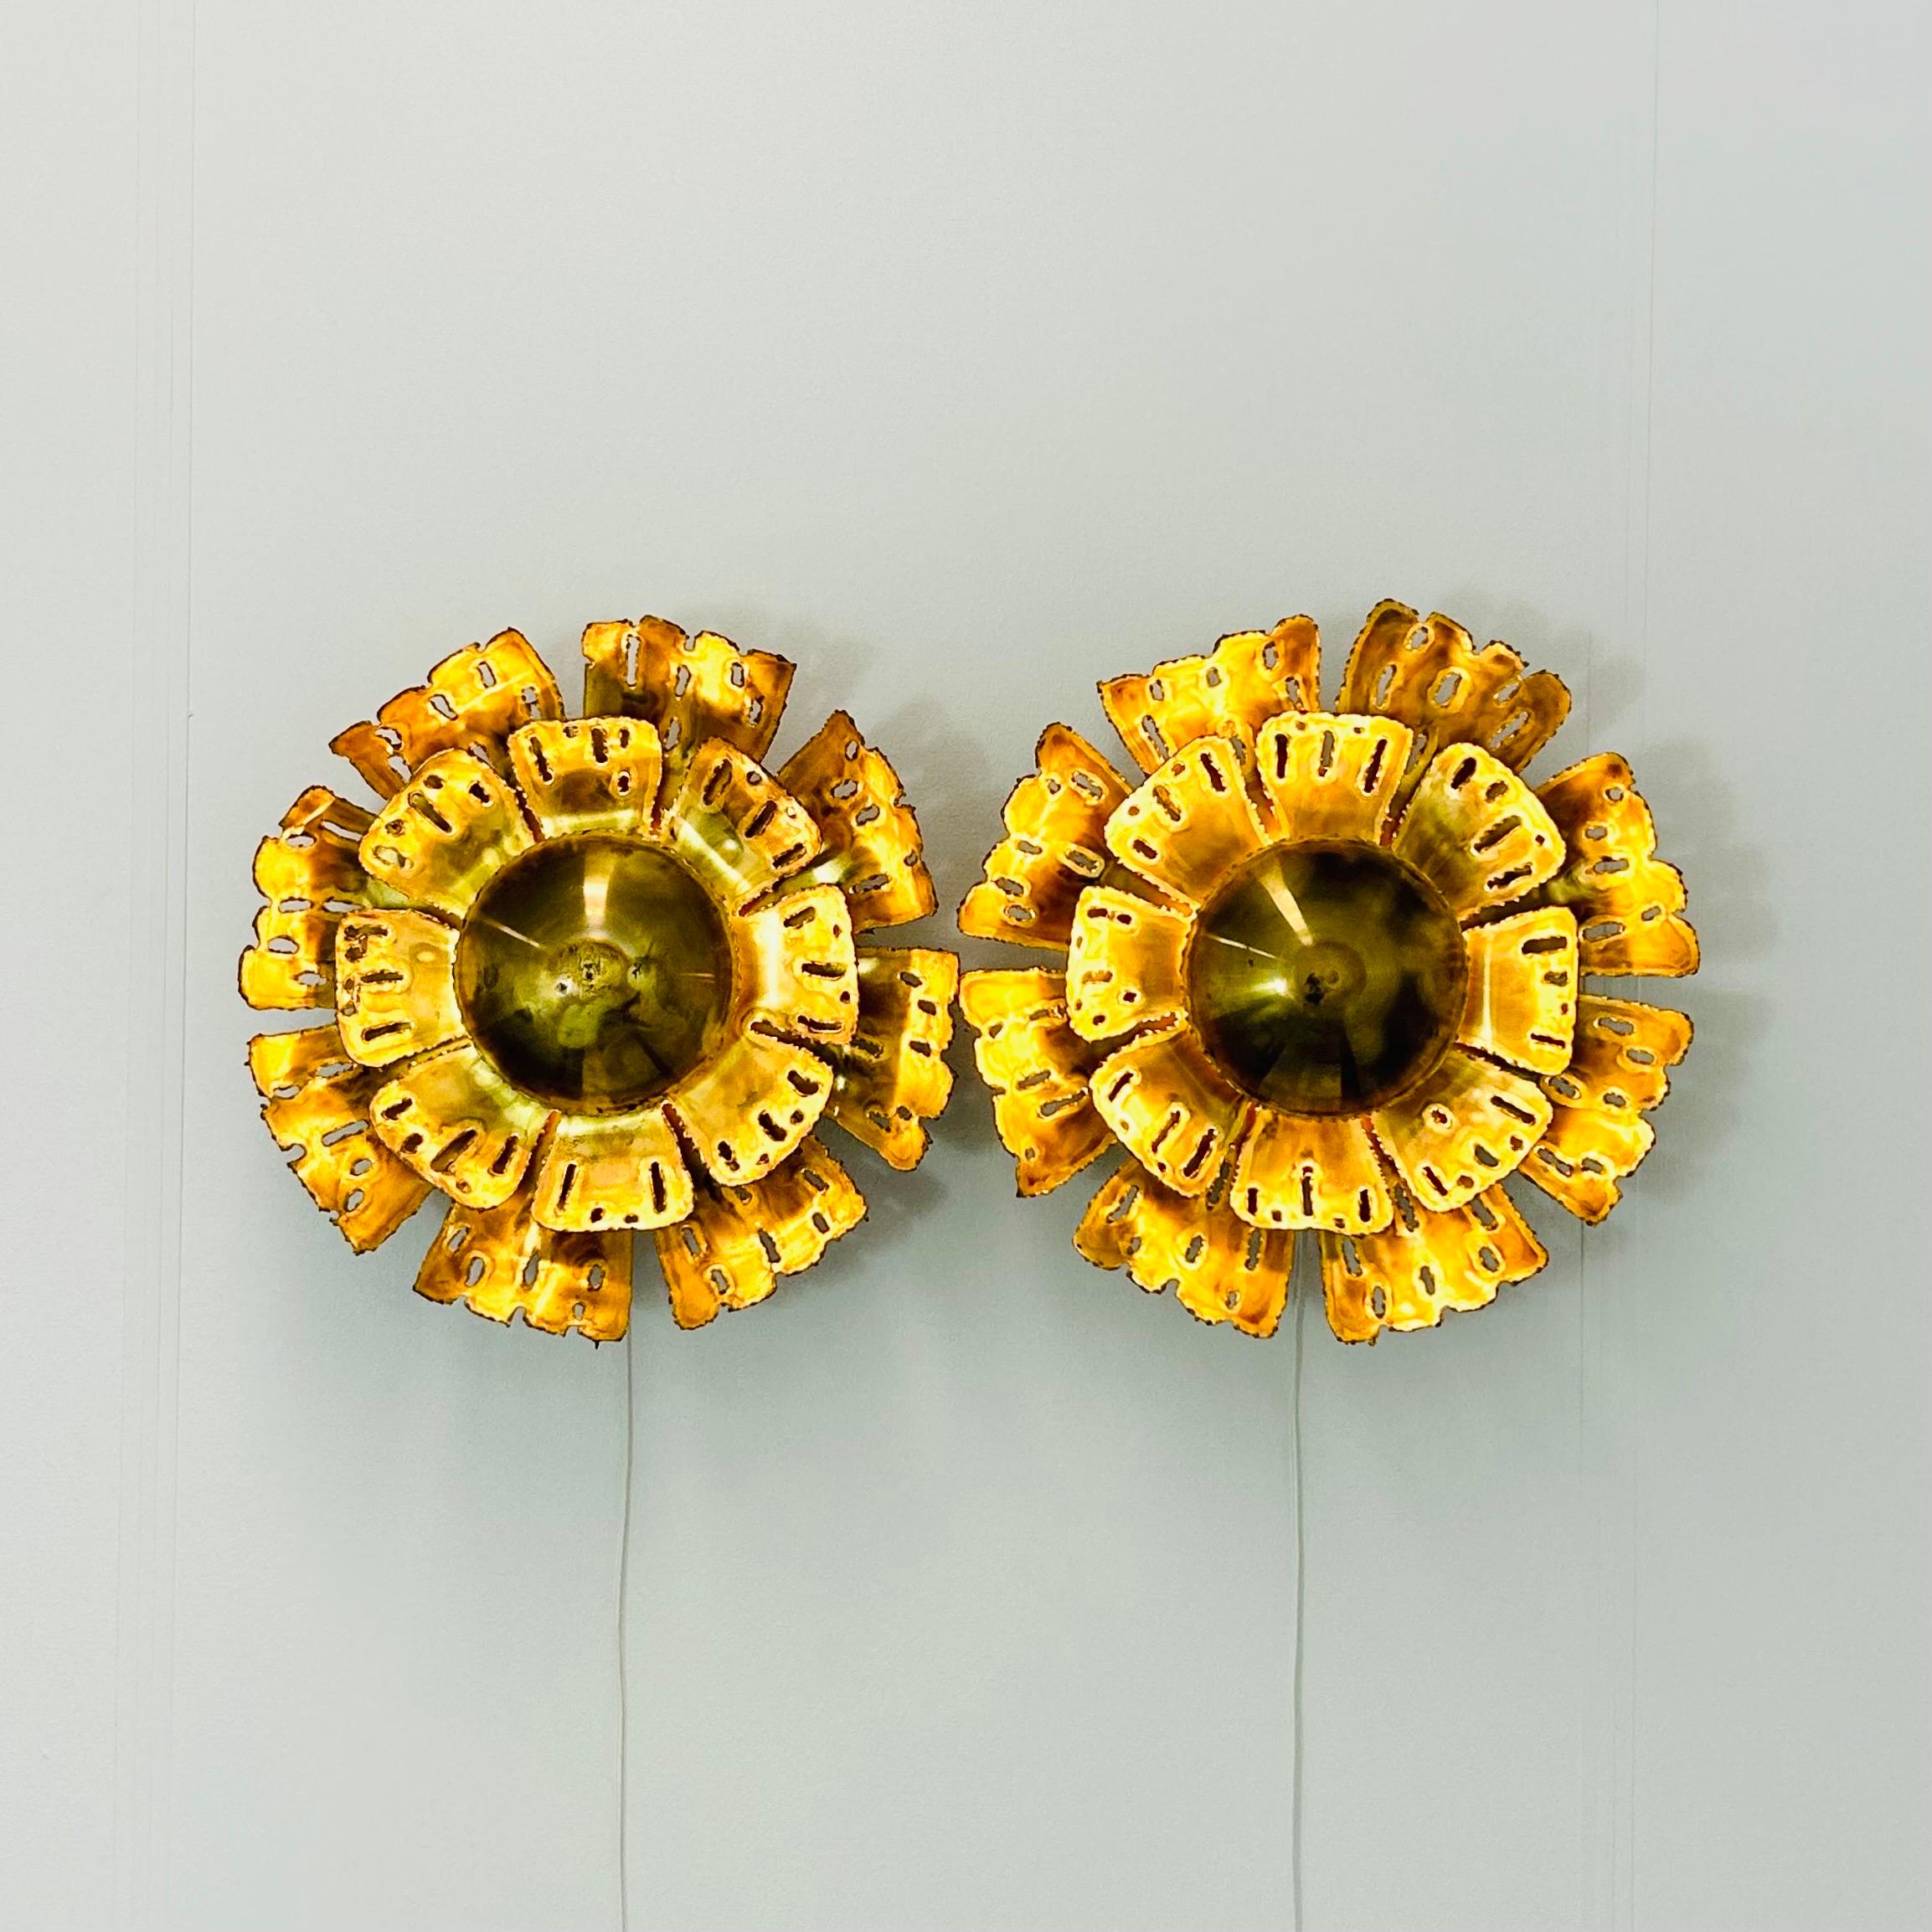 Danish Pair of Large Brass Wall Lamps by Svend Aage Holm Sorensen, 1960s, Denmark